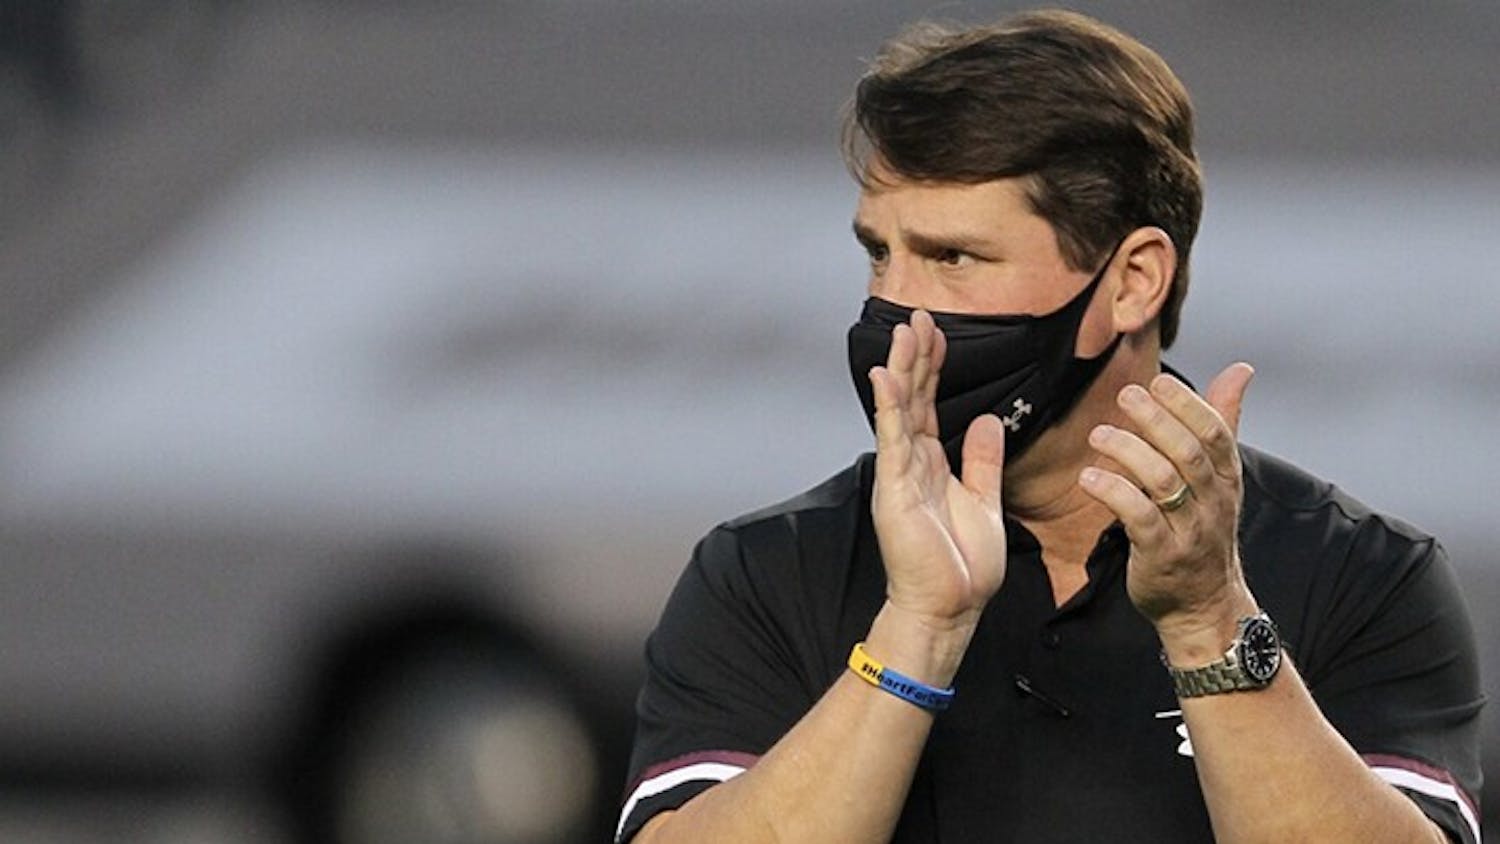 &nbsp;Head coach Will Muschamp clapping. Muschamp has been with the Gamecocks since 2015.